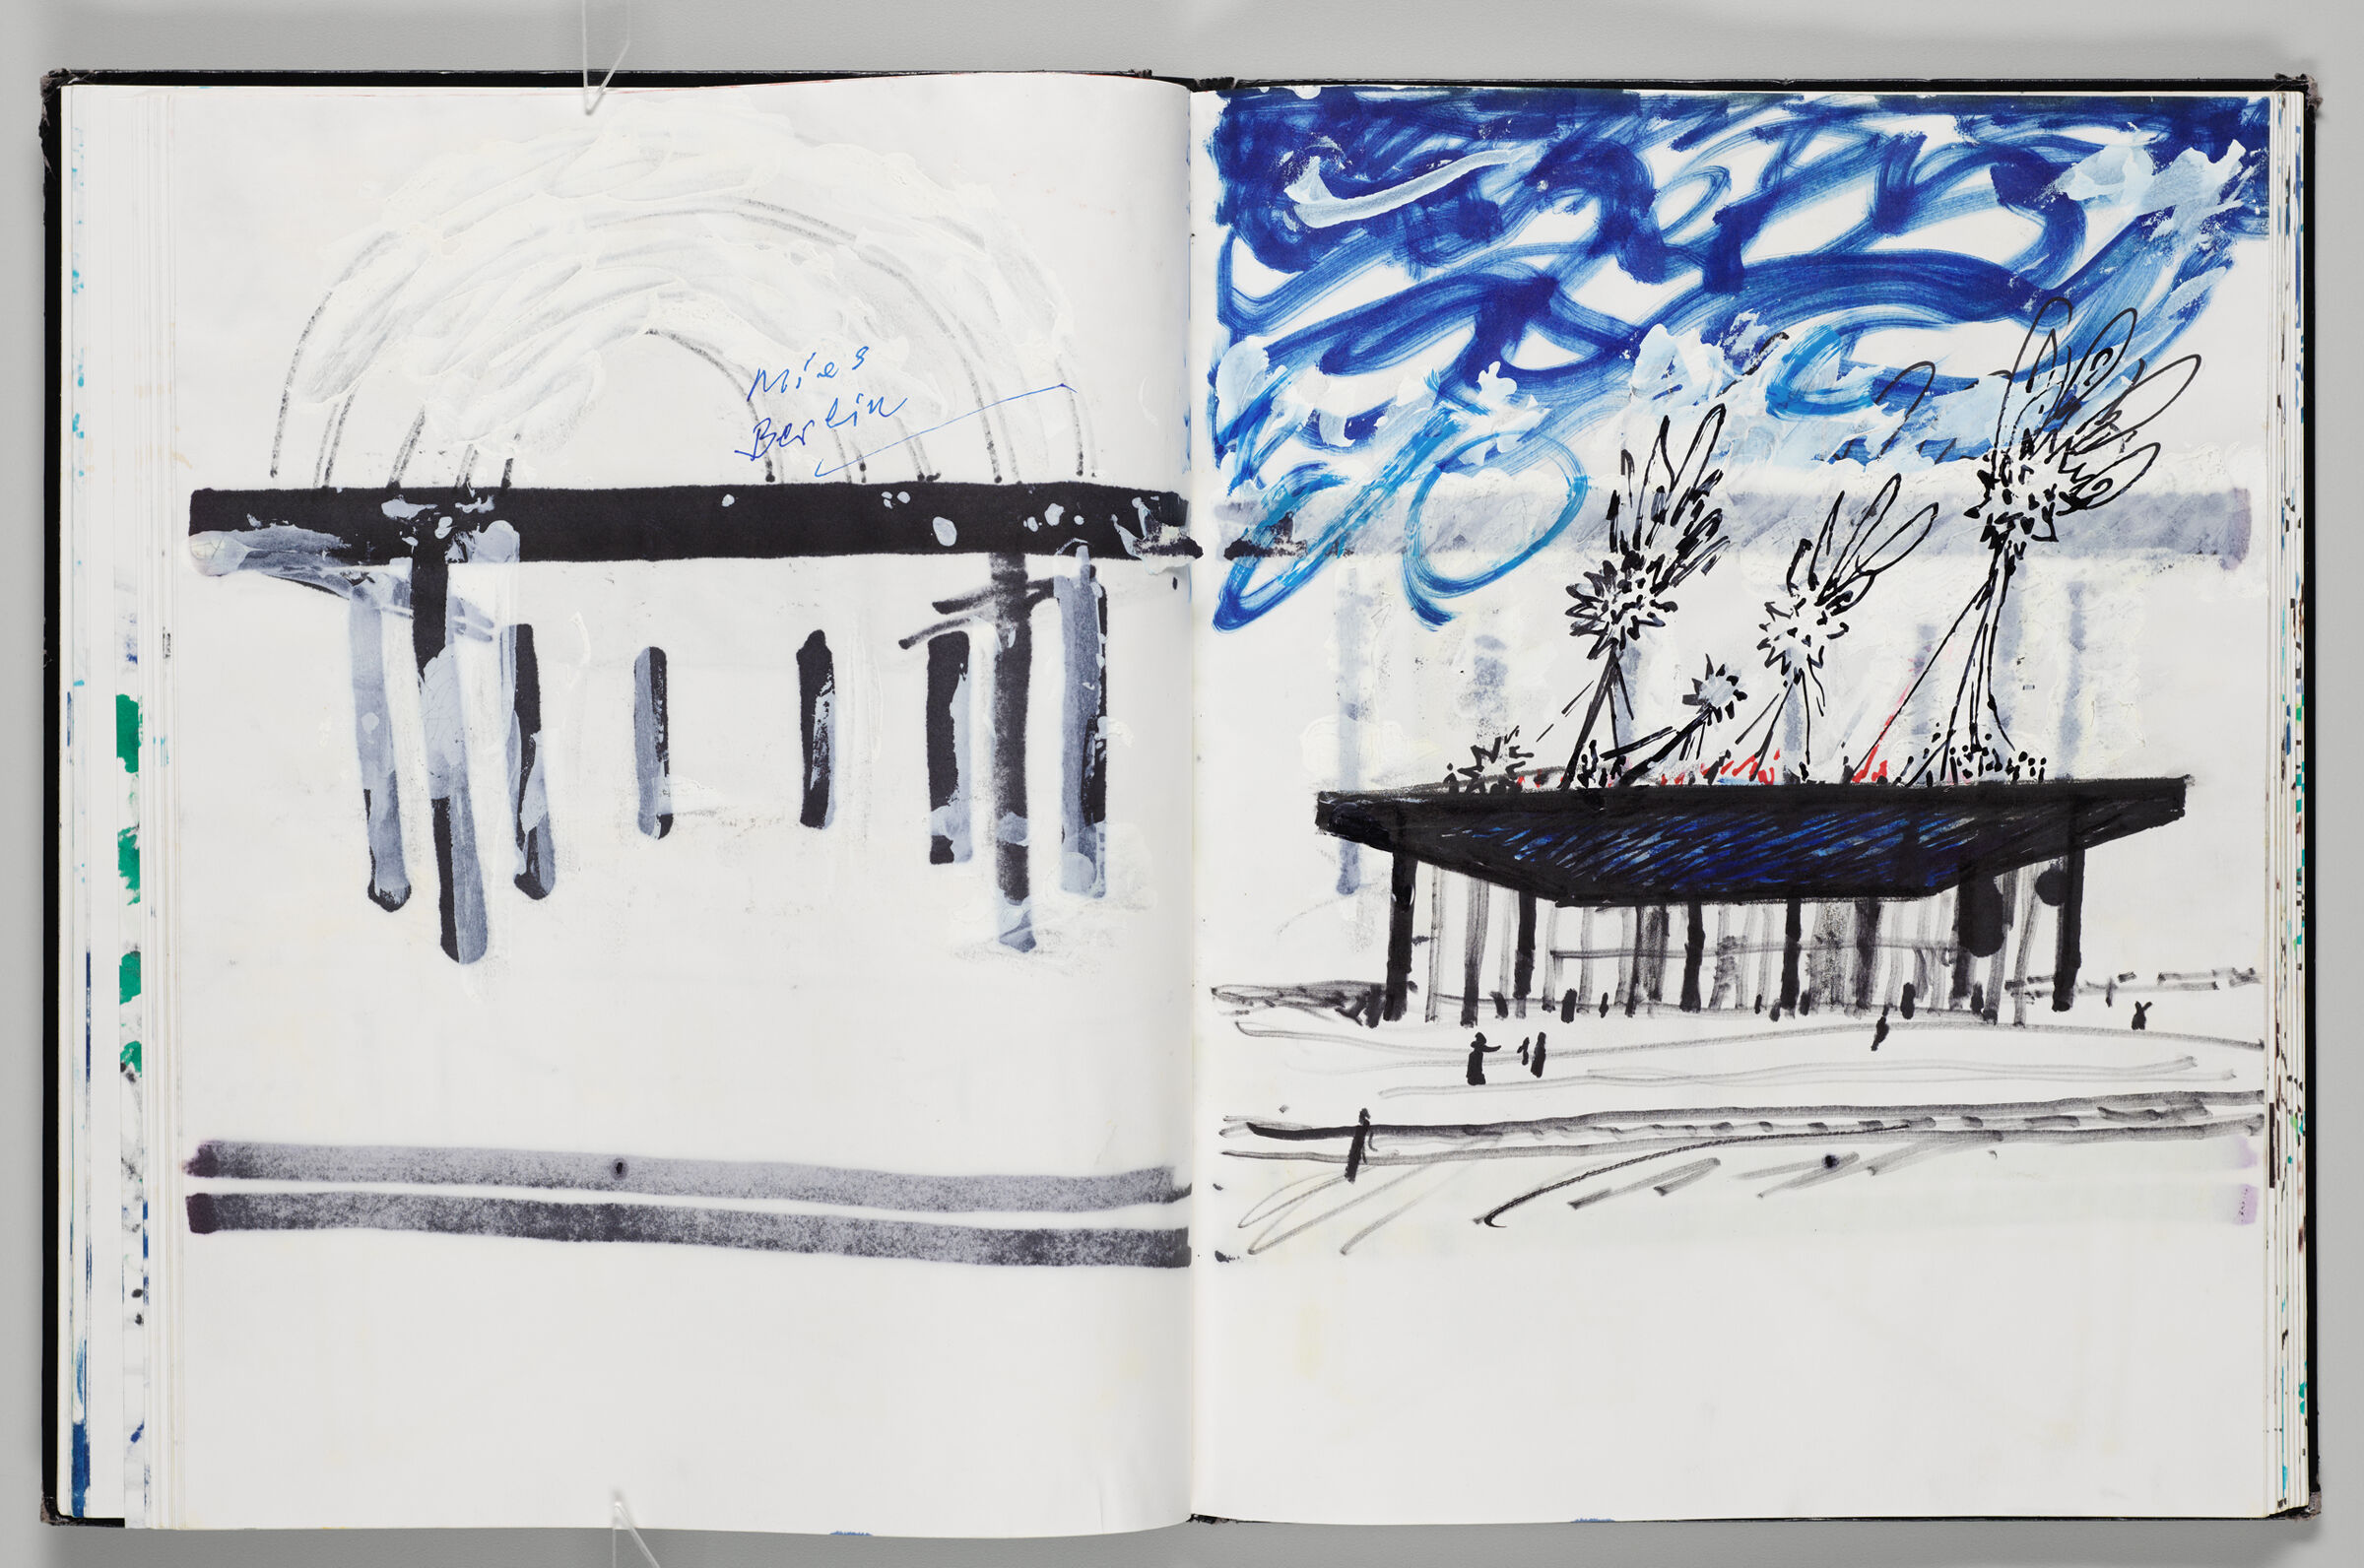 Untitled (Design For Neue Nationalgalerie Inflatables Over Bleed-Through Of Previous Page And Color Transfer, Left Page); Untitled (Design For Neue Nationalgalerie Inflatables, Right Page)